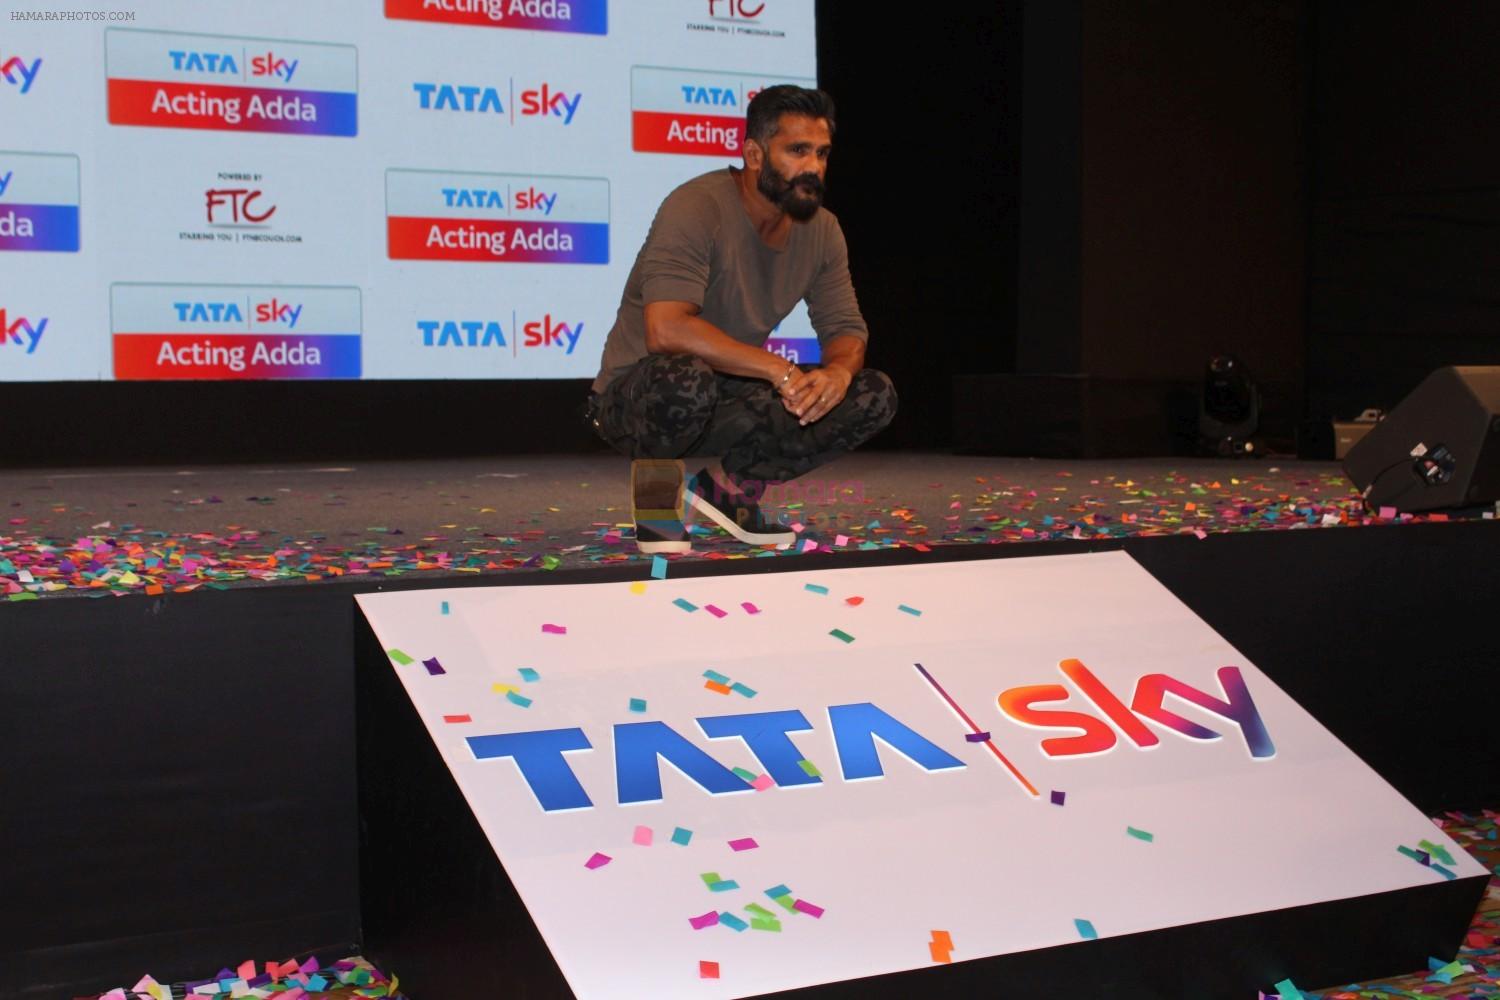 Suniel Shetty At Launch Of Tata Sky Next Pioneering Initiative on 15th May 2017